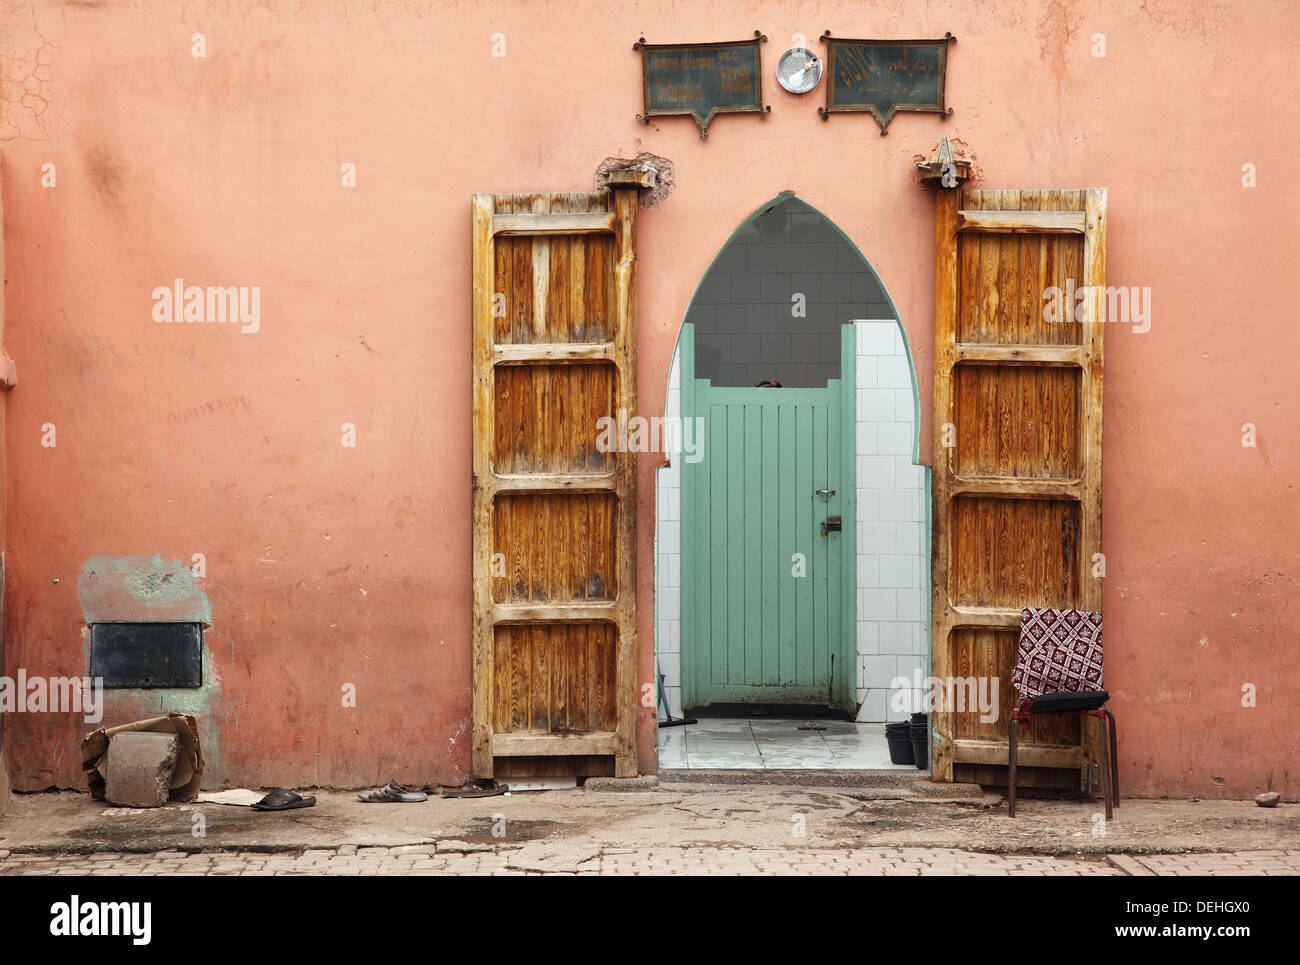 Toilet Morocco High Resolution Stock Photography and Images - Alamy